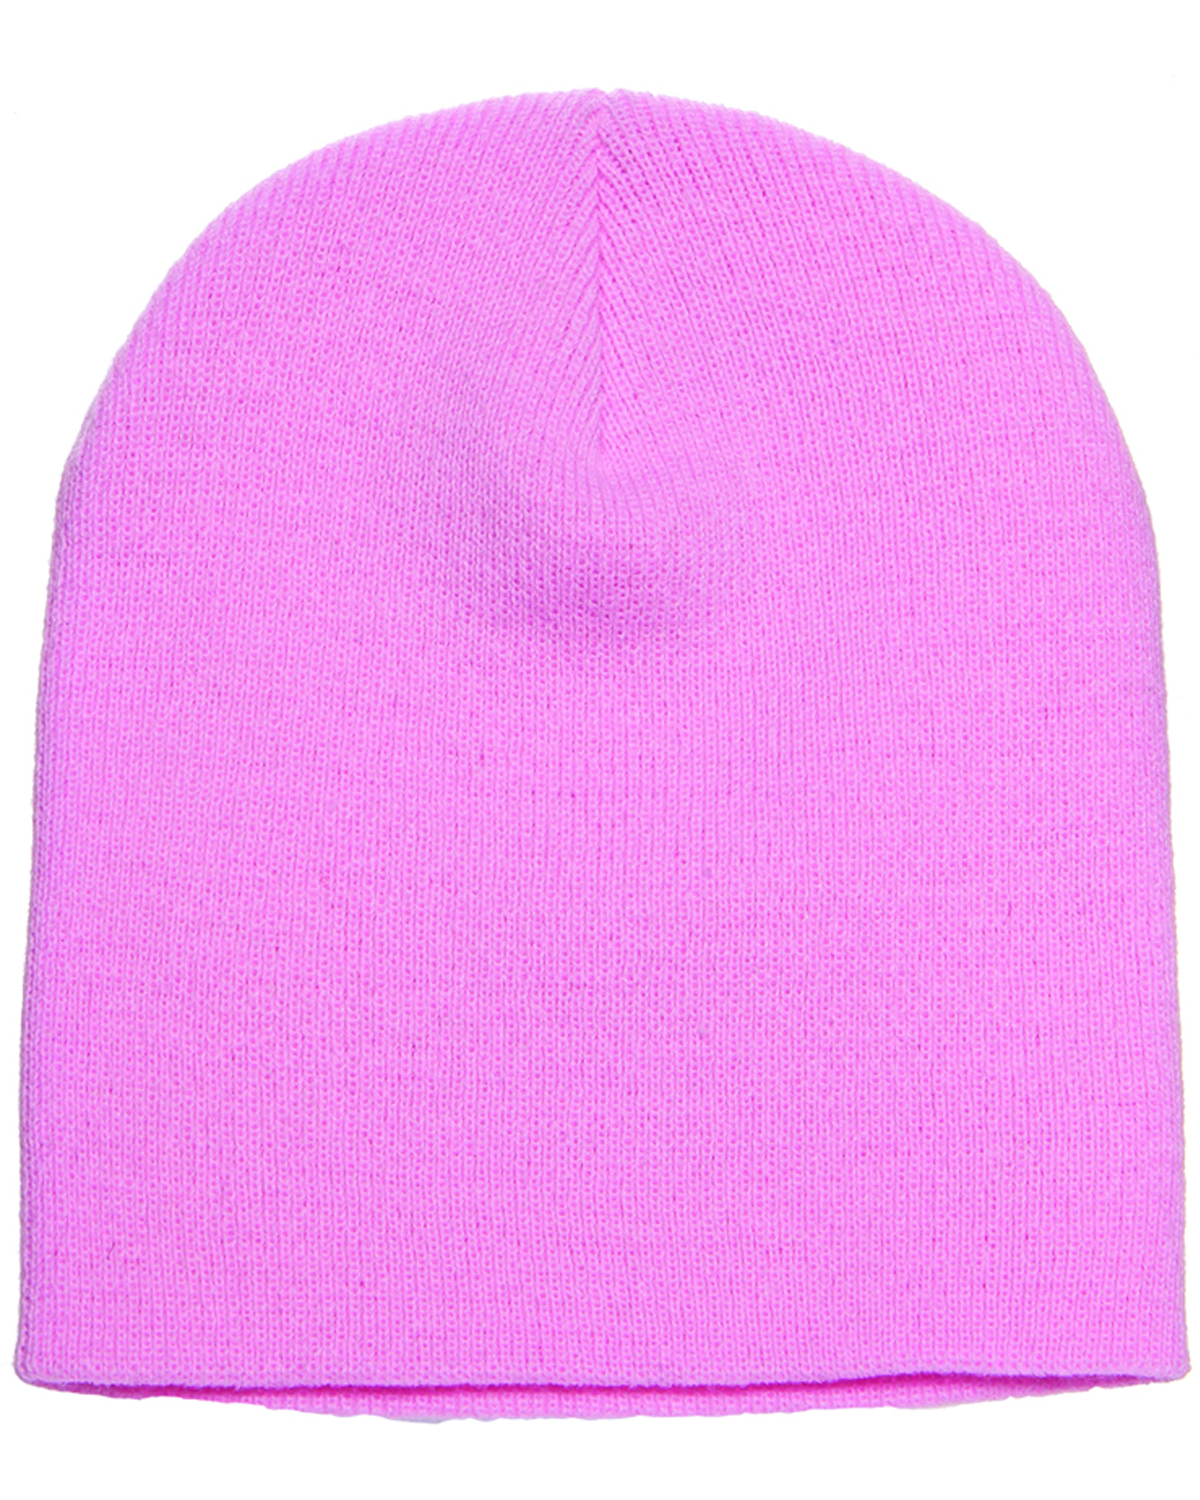 | Knit ShirtSpace Beanie 1500 Yupoong Adult |